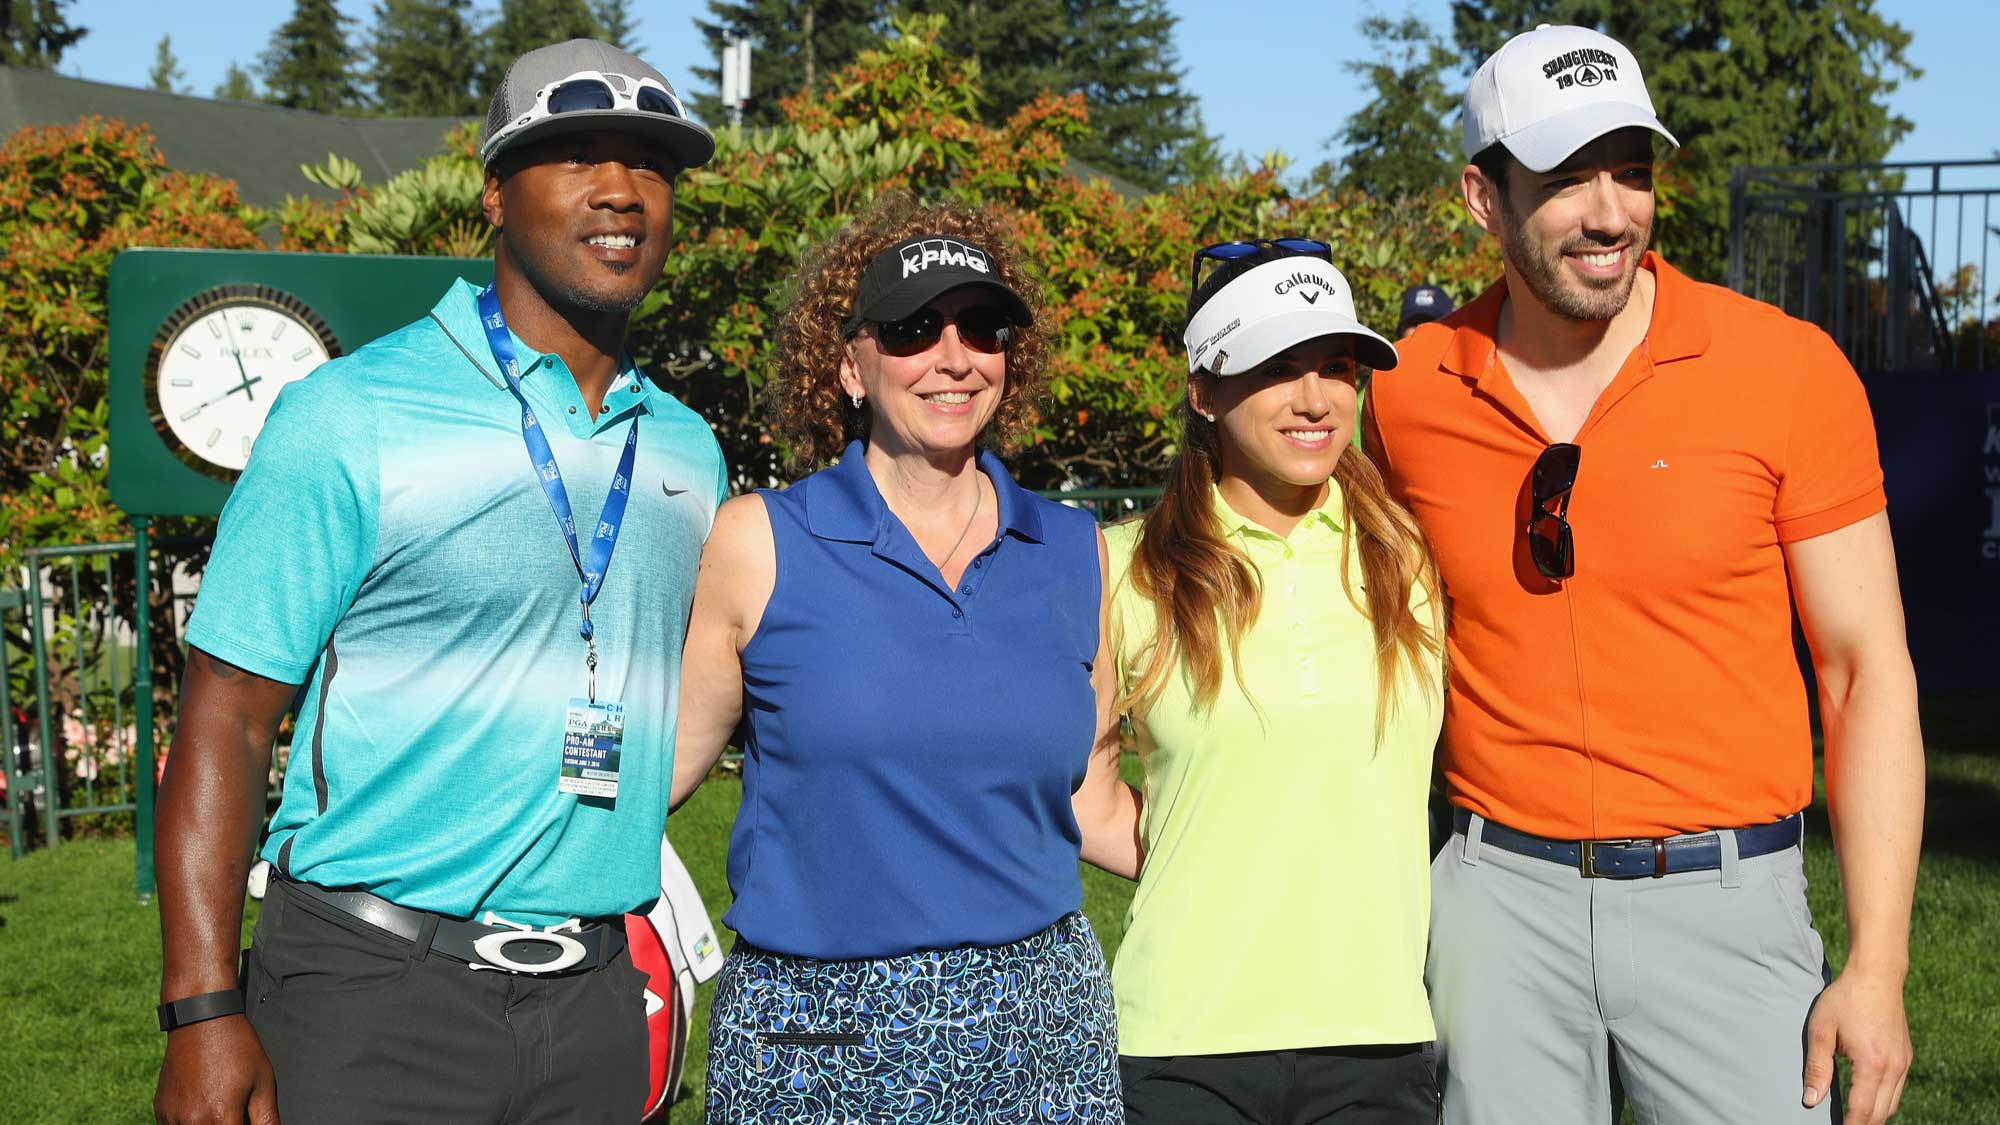 Lawyer Milloy, Laura Newinski of KPMG, Belen Mozo of Spain and HGTV's Drew Scott pose on the first tee during the pro-am prior to the start of the KPMG Women's PGA Championship